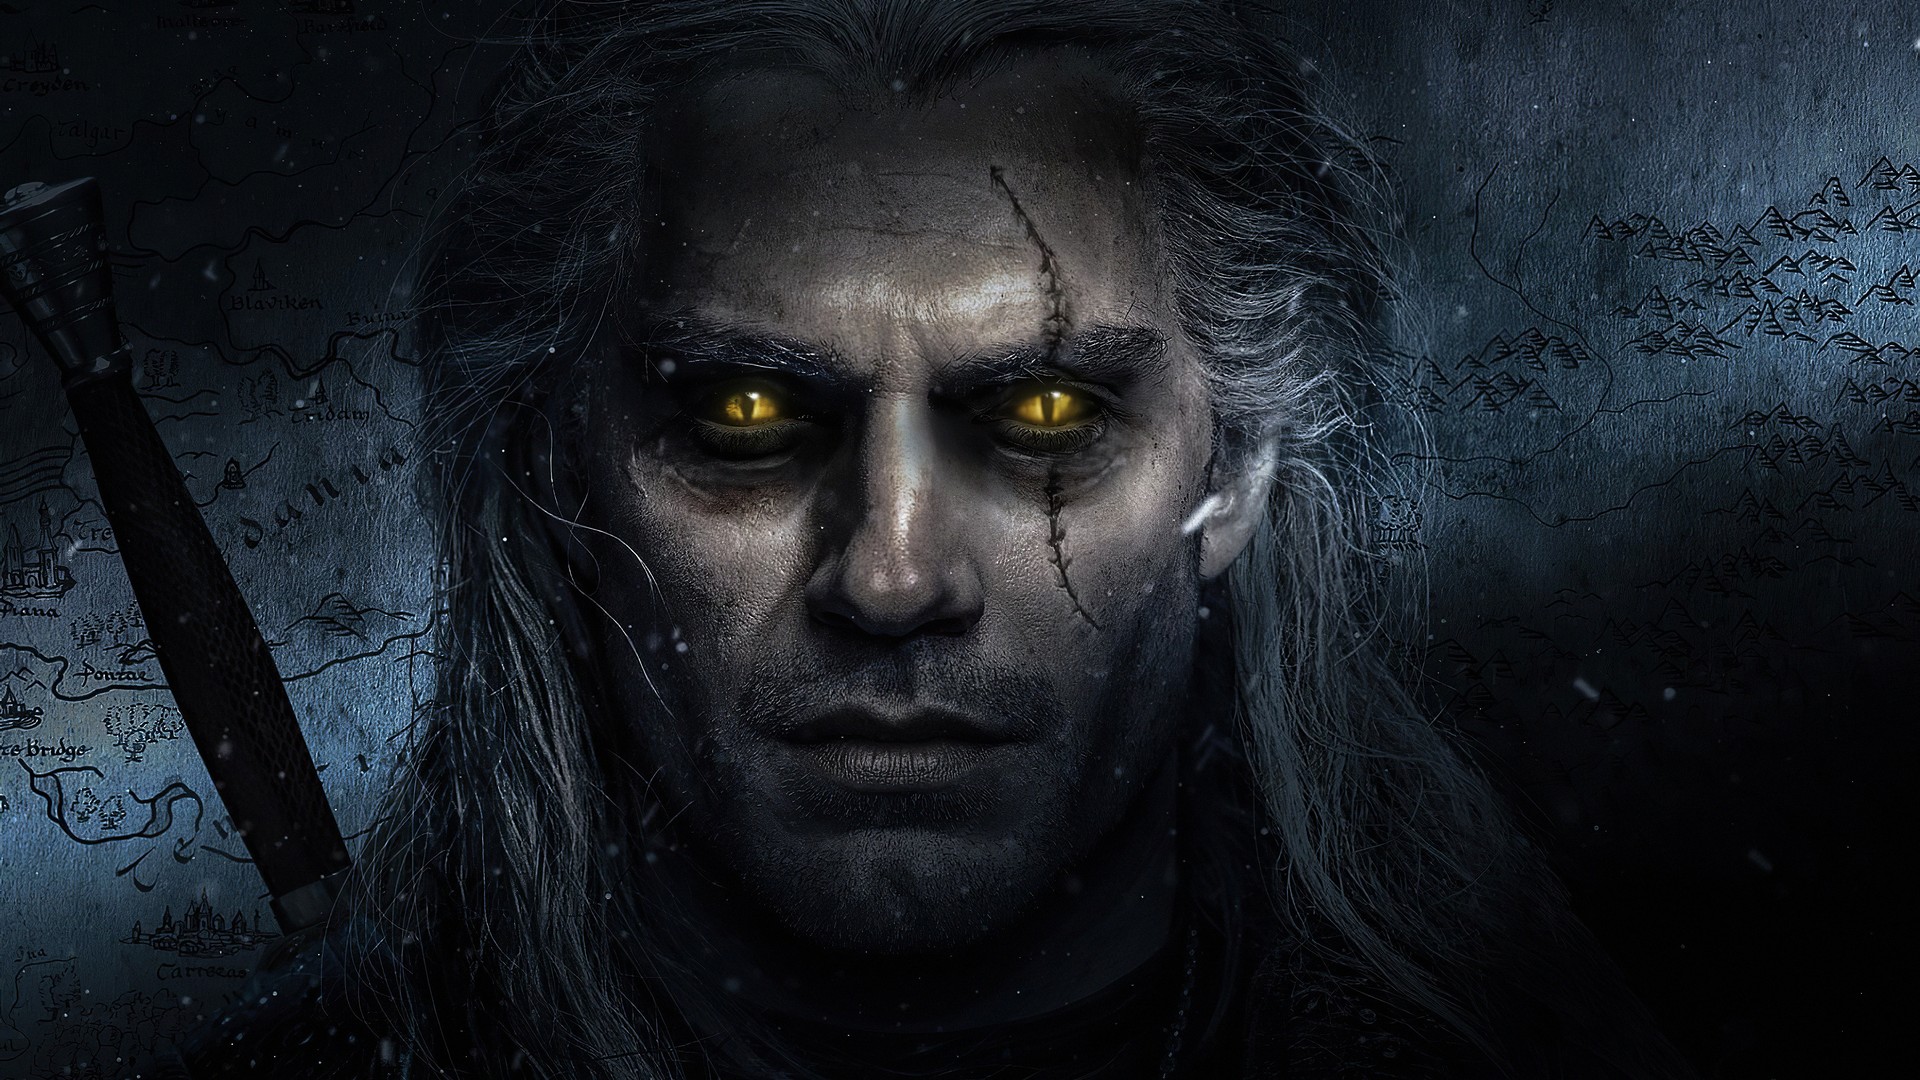 The Witcher Wallpaper HD with high-resolution 1920x1080 pixel. You can use this wallpaper for your Desktop Computer Backgrounds, Mac Wallpapers, Android Lock screen or iPhone Screensavers and another smartphone device